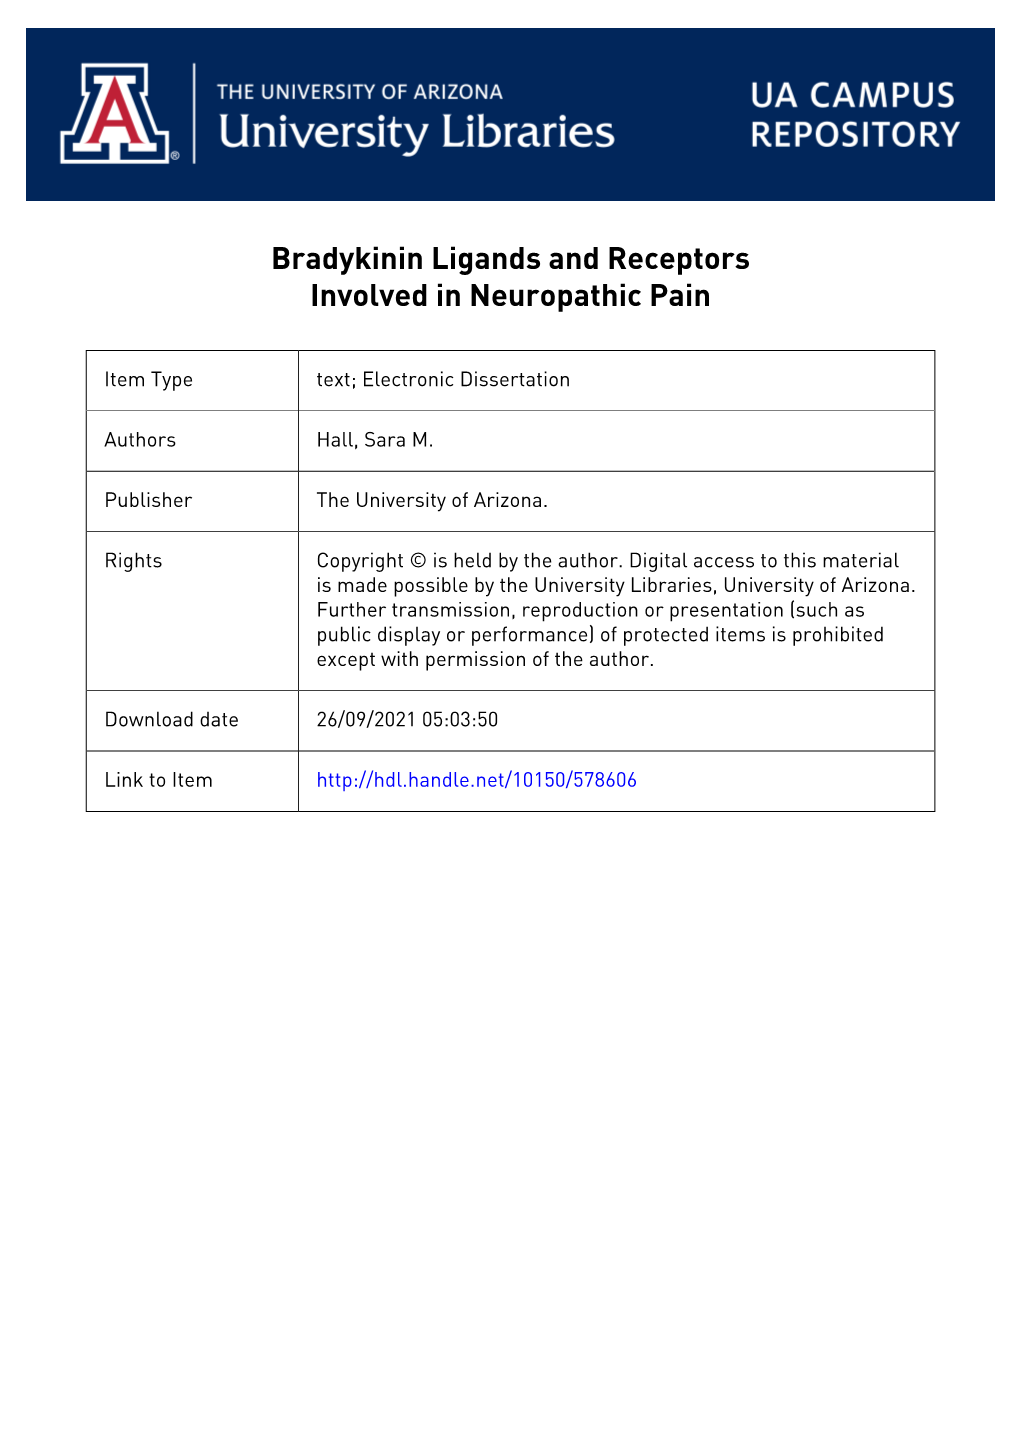 Bradykinin Ligands and Receptors Involved in Neuropathic Pain